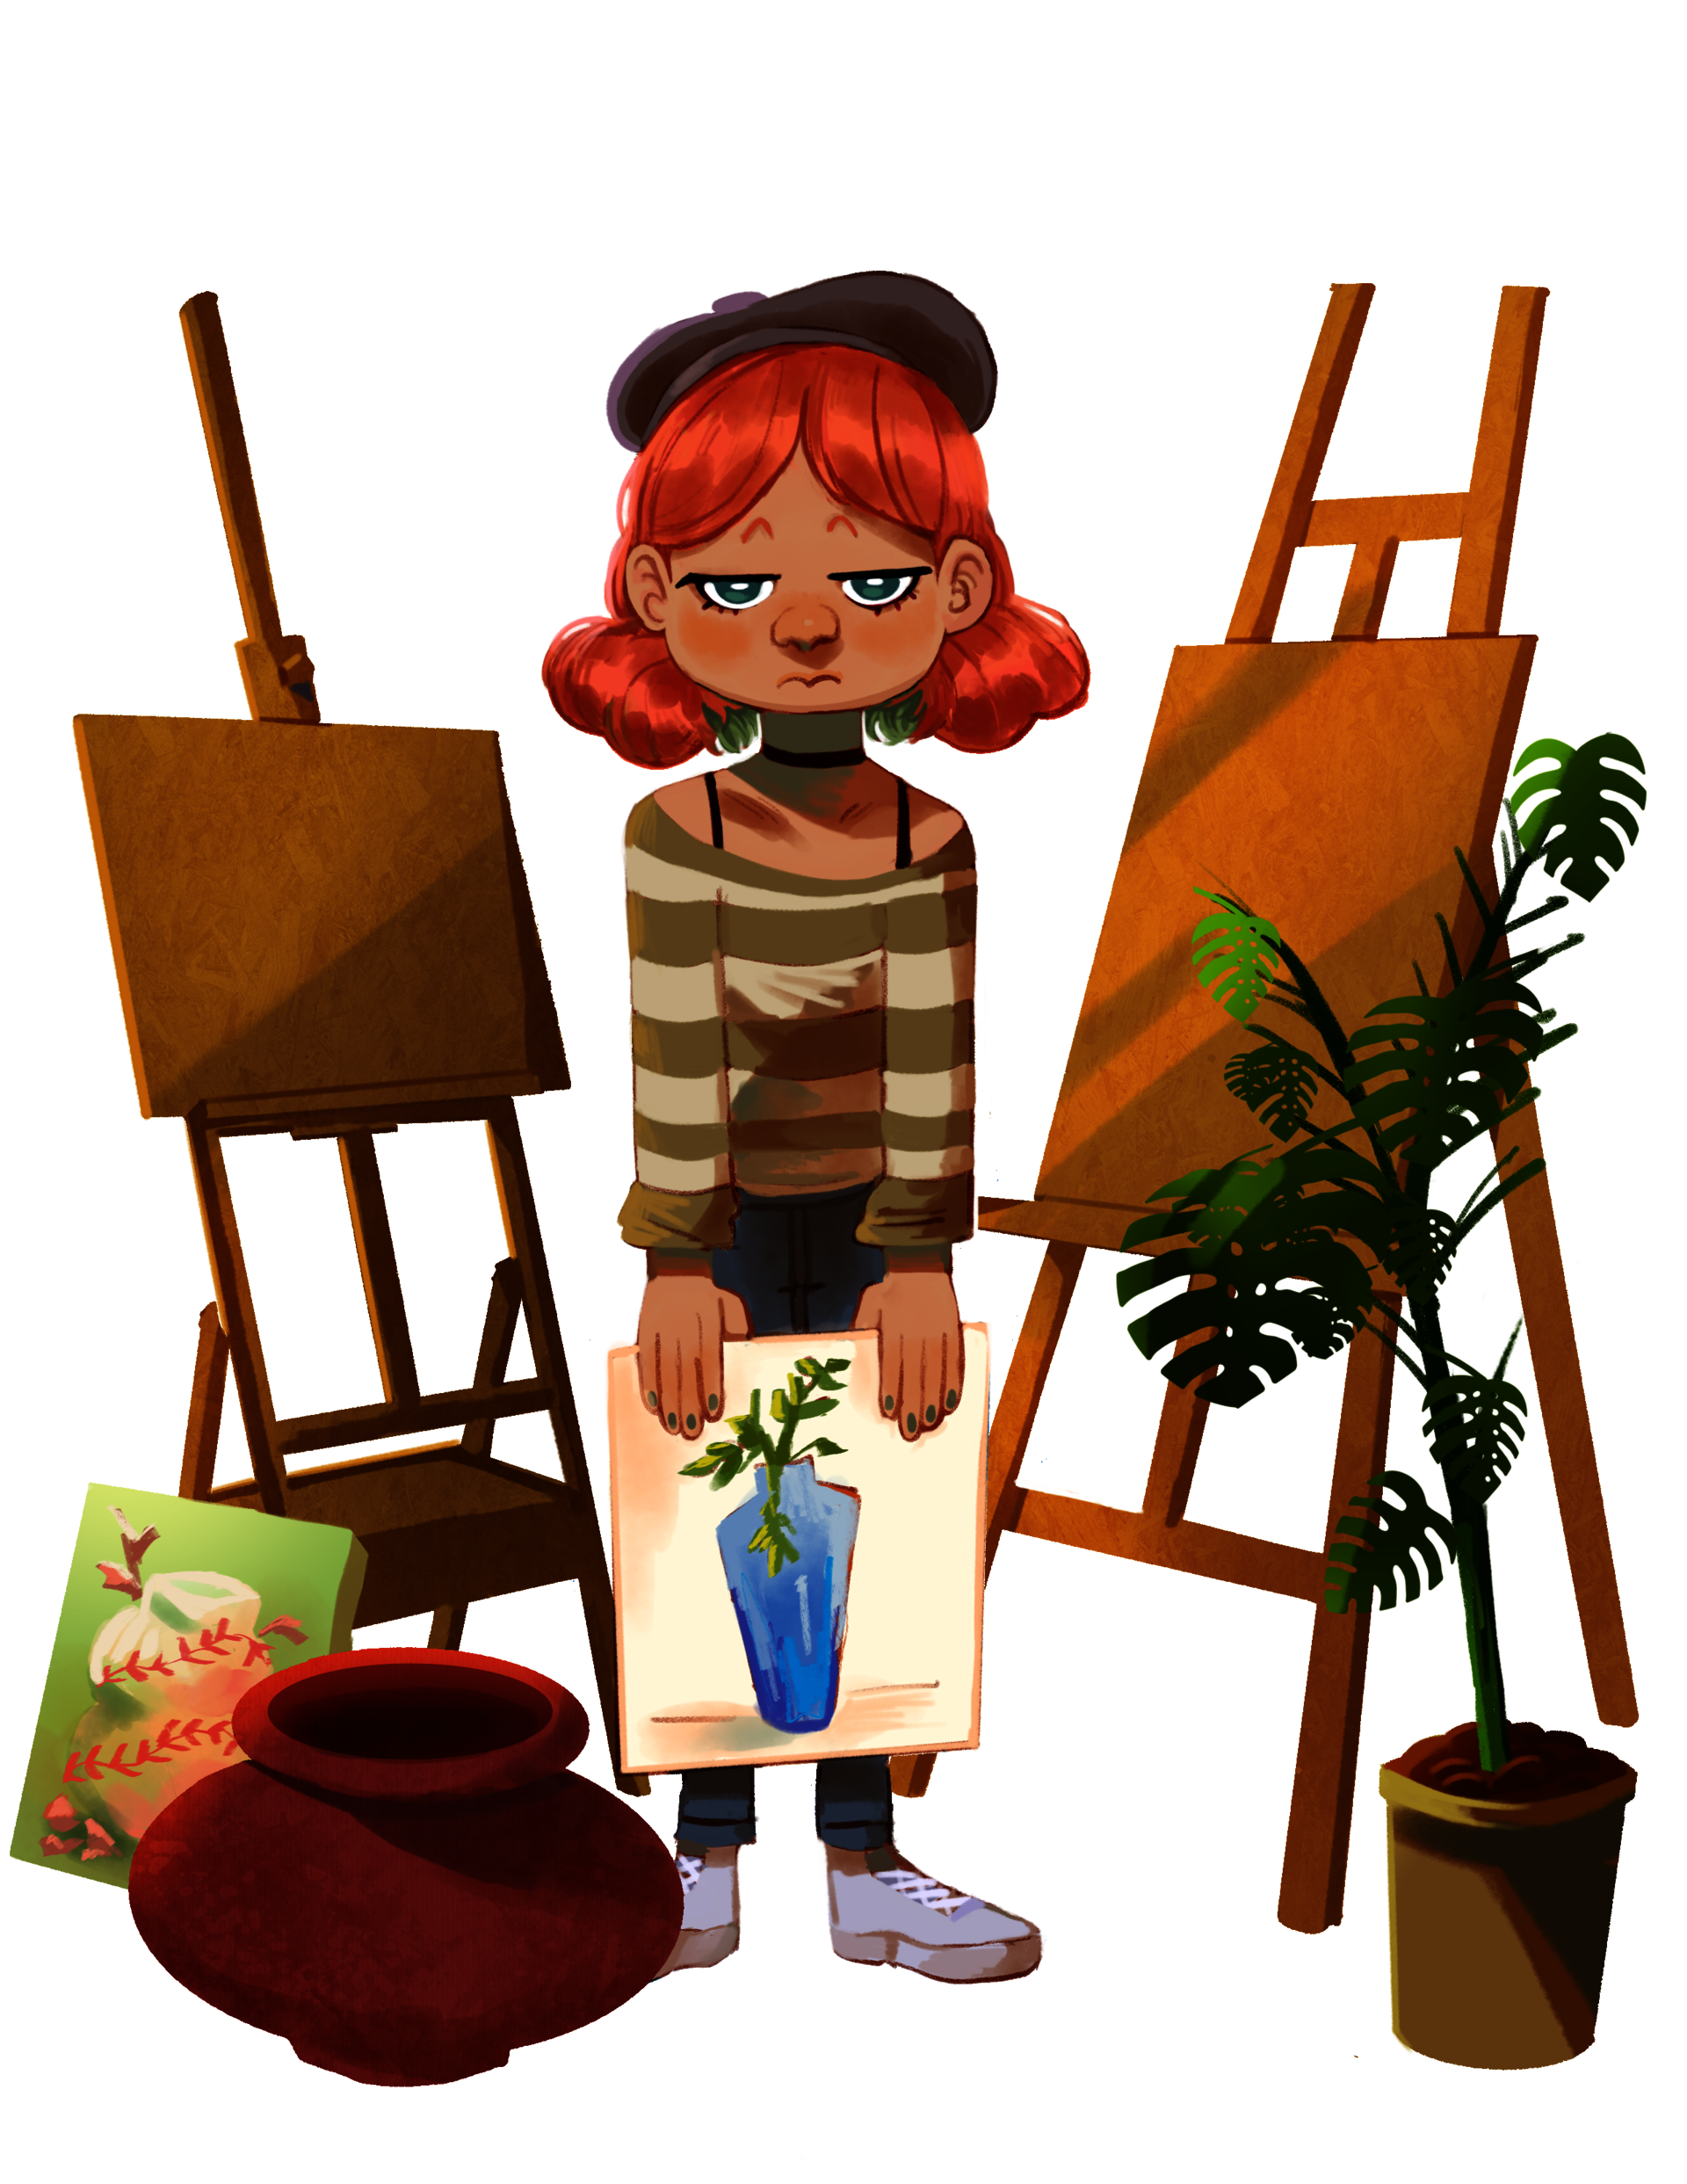 A young tan girl with bright orange hair, standing in the middle of two art easels, pots, and plants. She is holding a canvas with a blue vase on it.